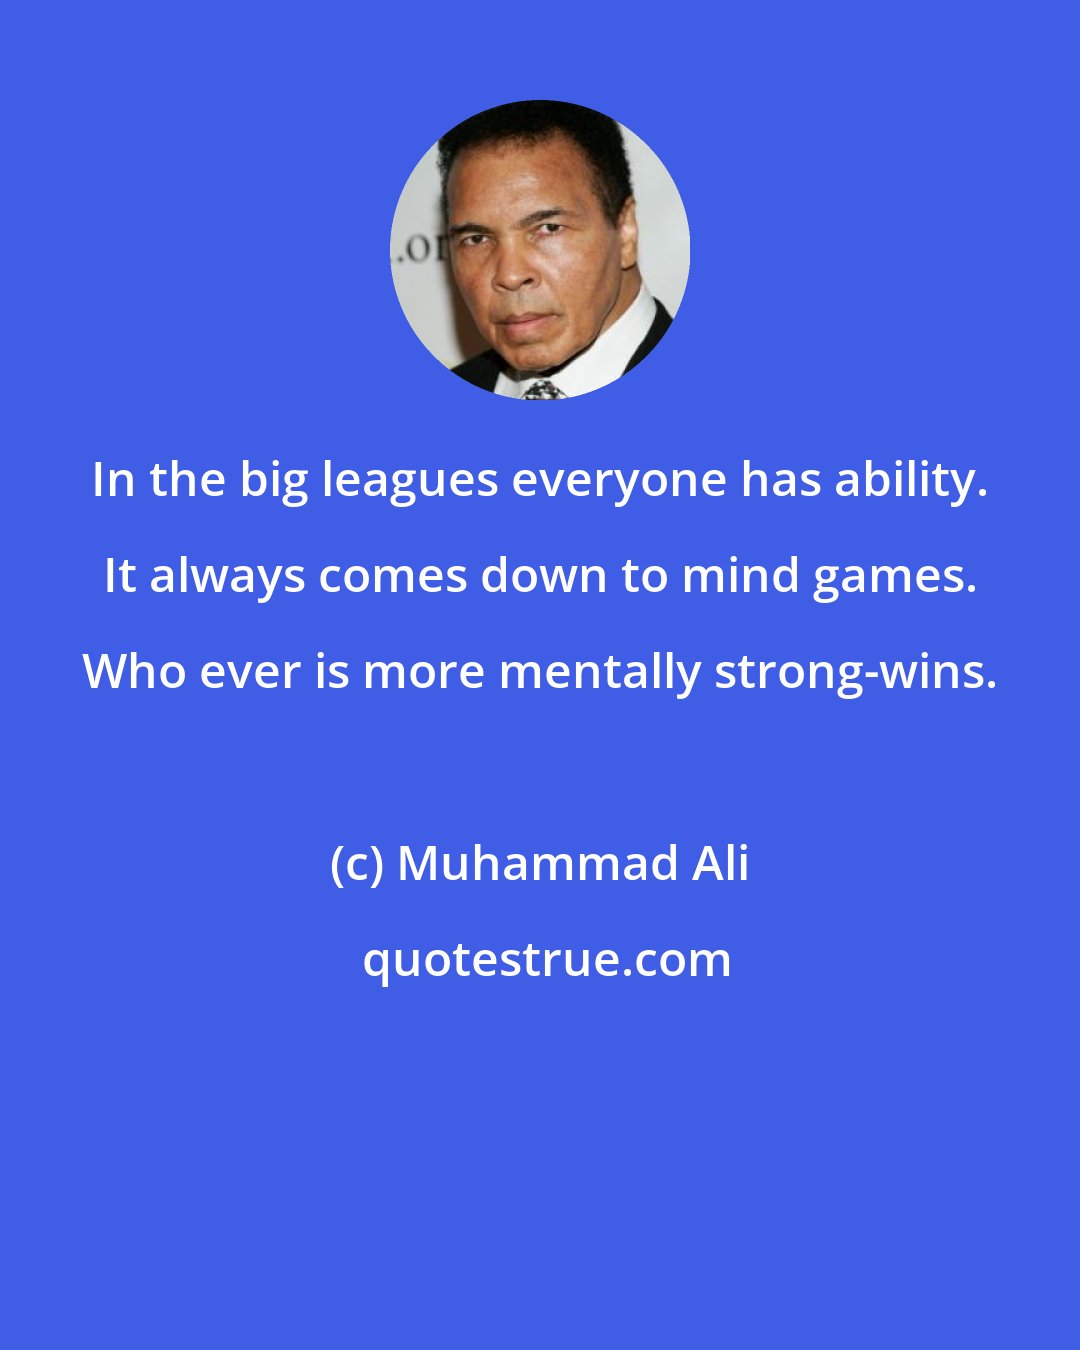 Muhammad Ali: In the big leagues everyone has ability. It always comes down to mind games. Who ever is more mentally strong-wins.